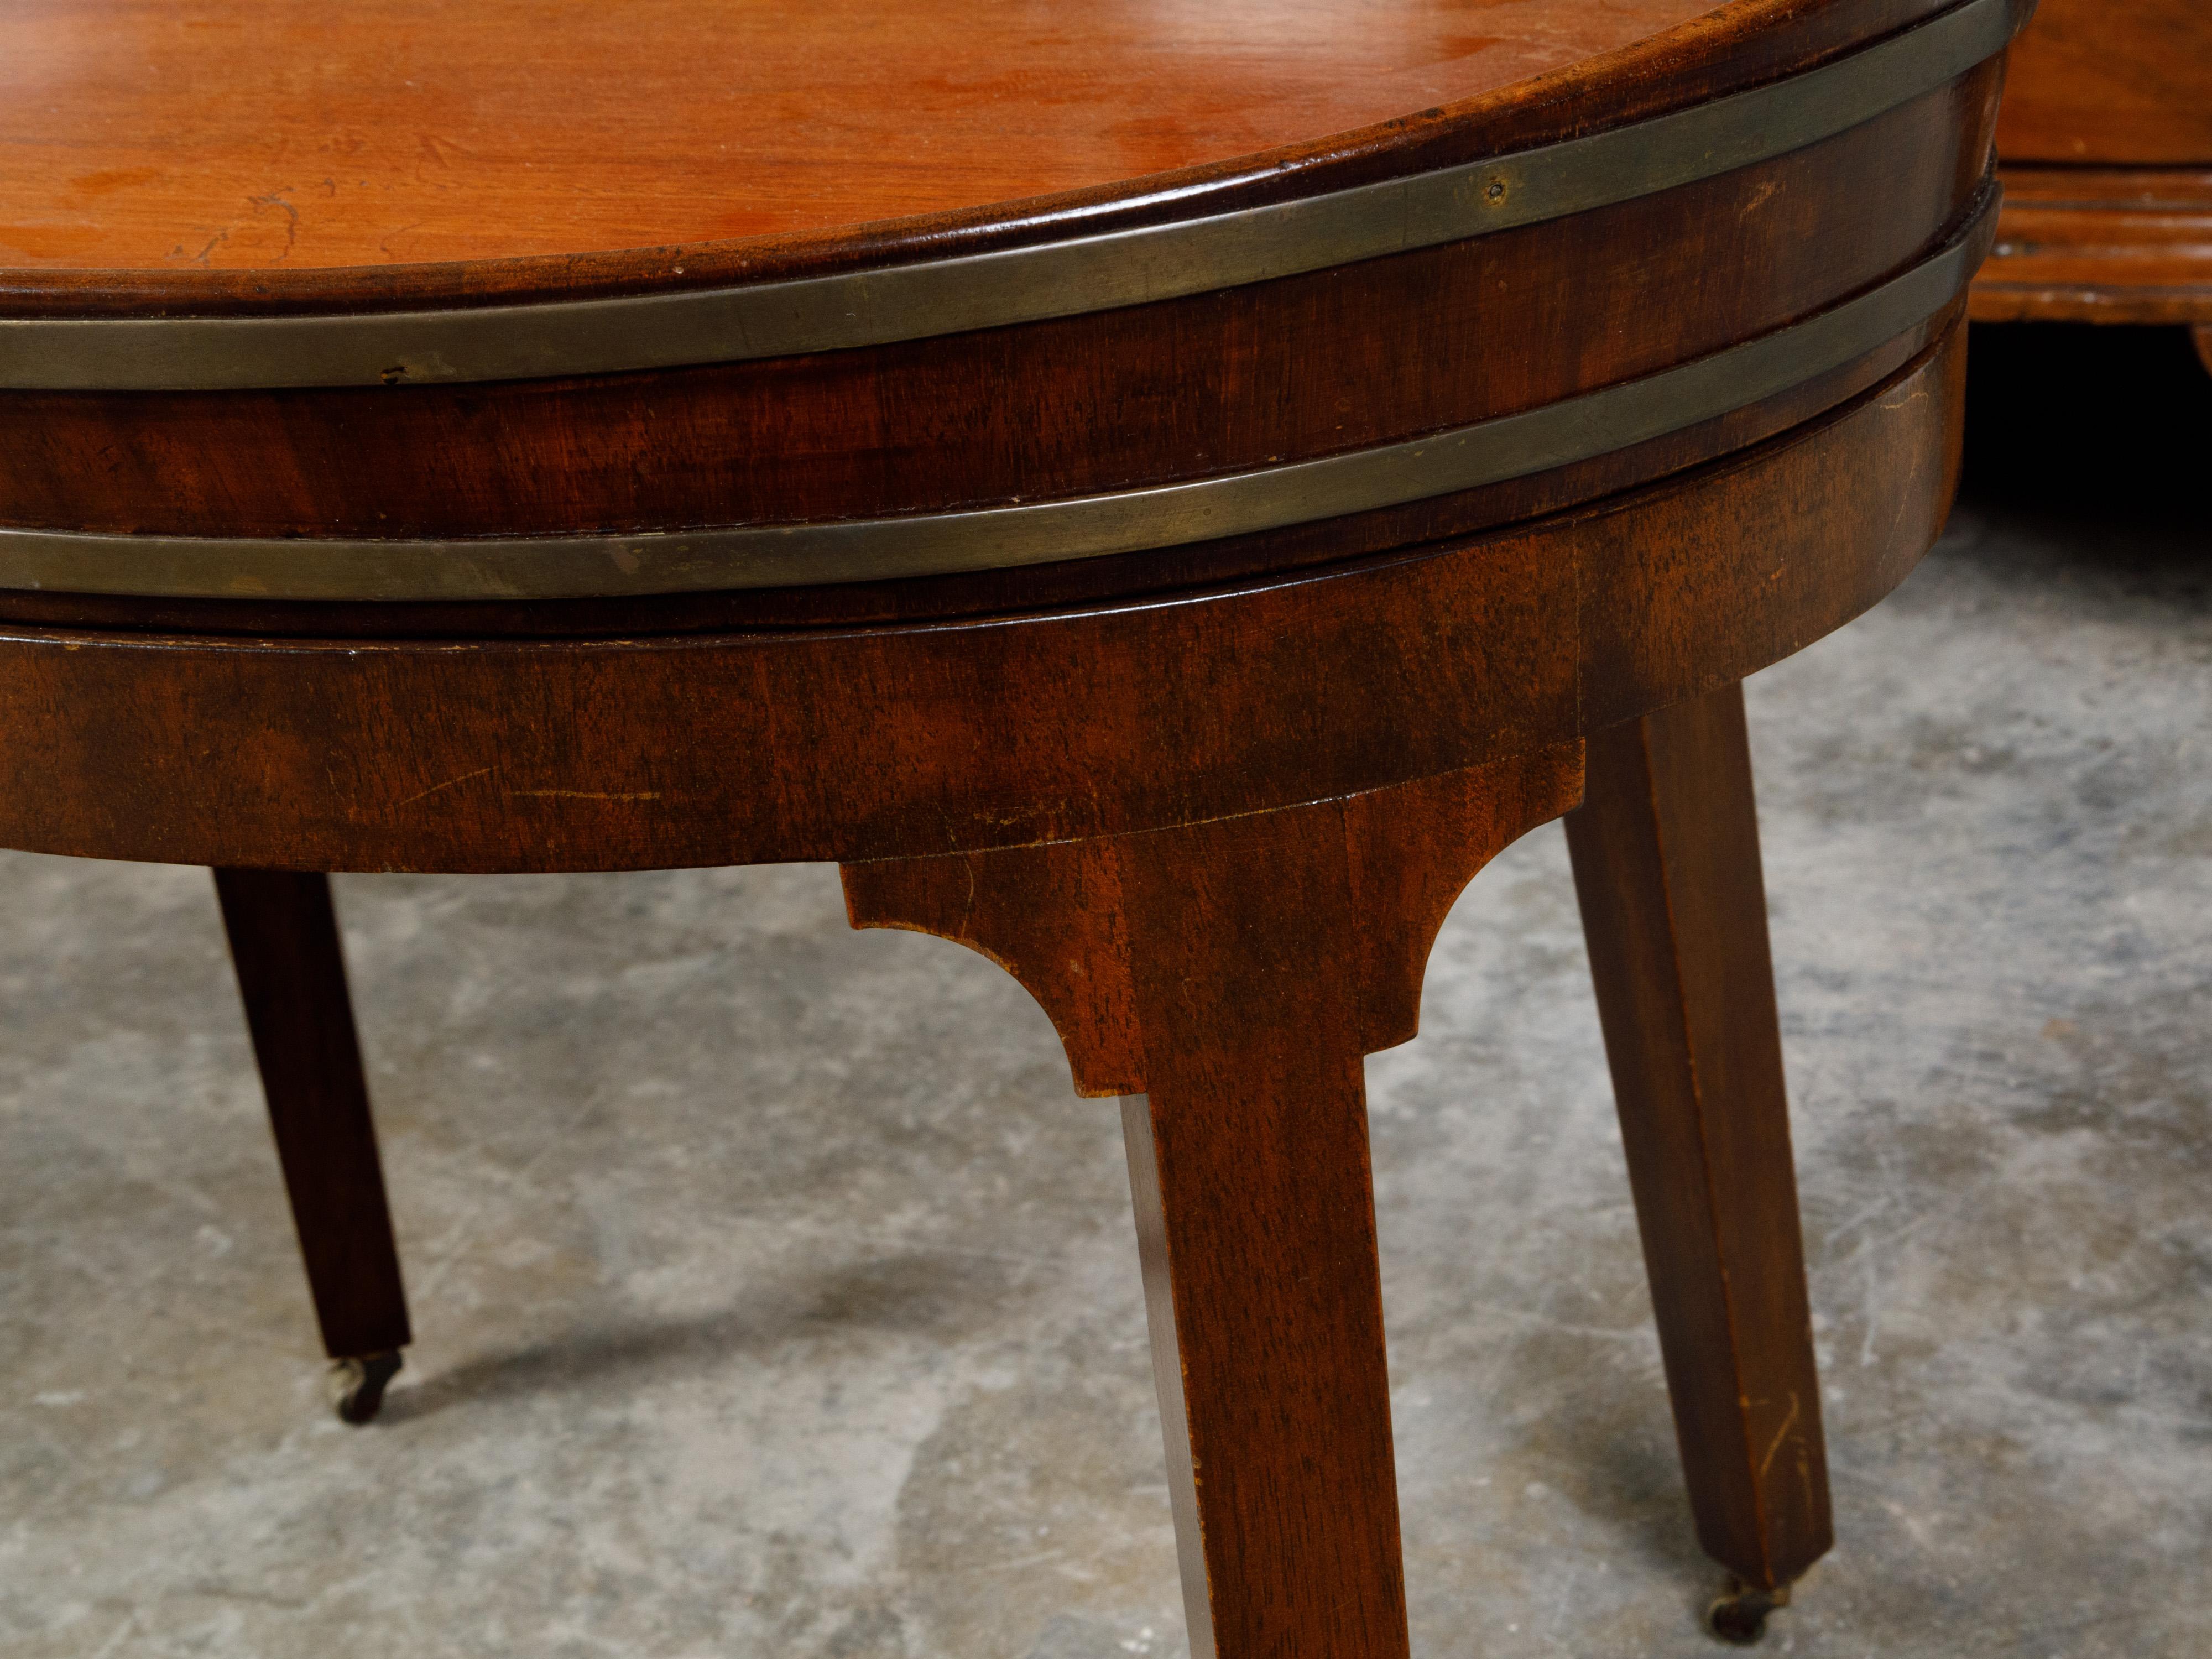 English 19th Century Oval Mahogany Tray Top Table with Brass Accents and Casters For Sale 1